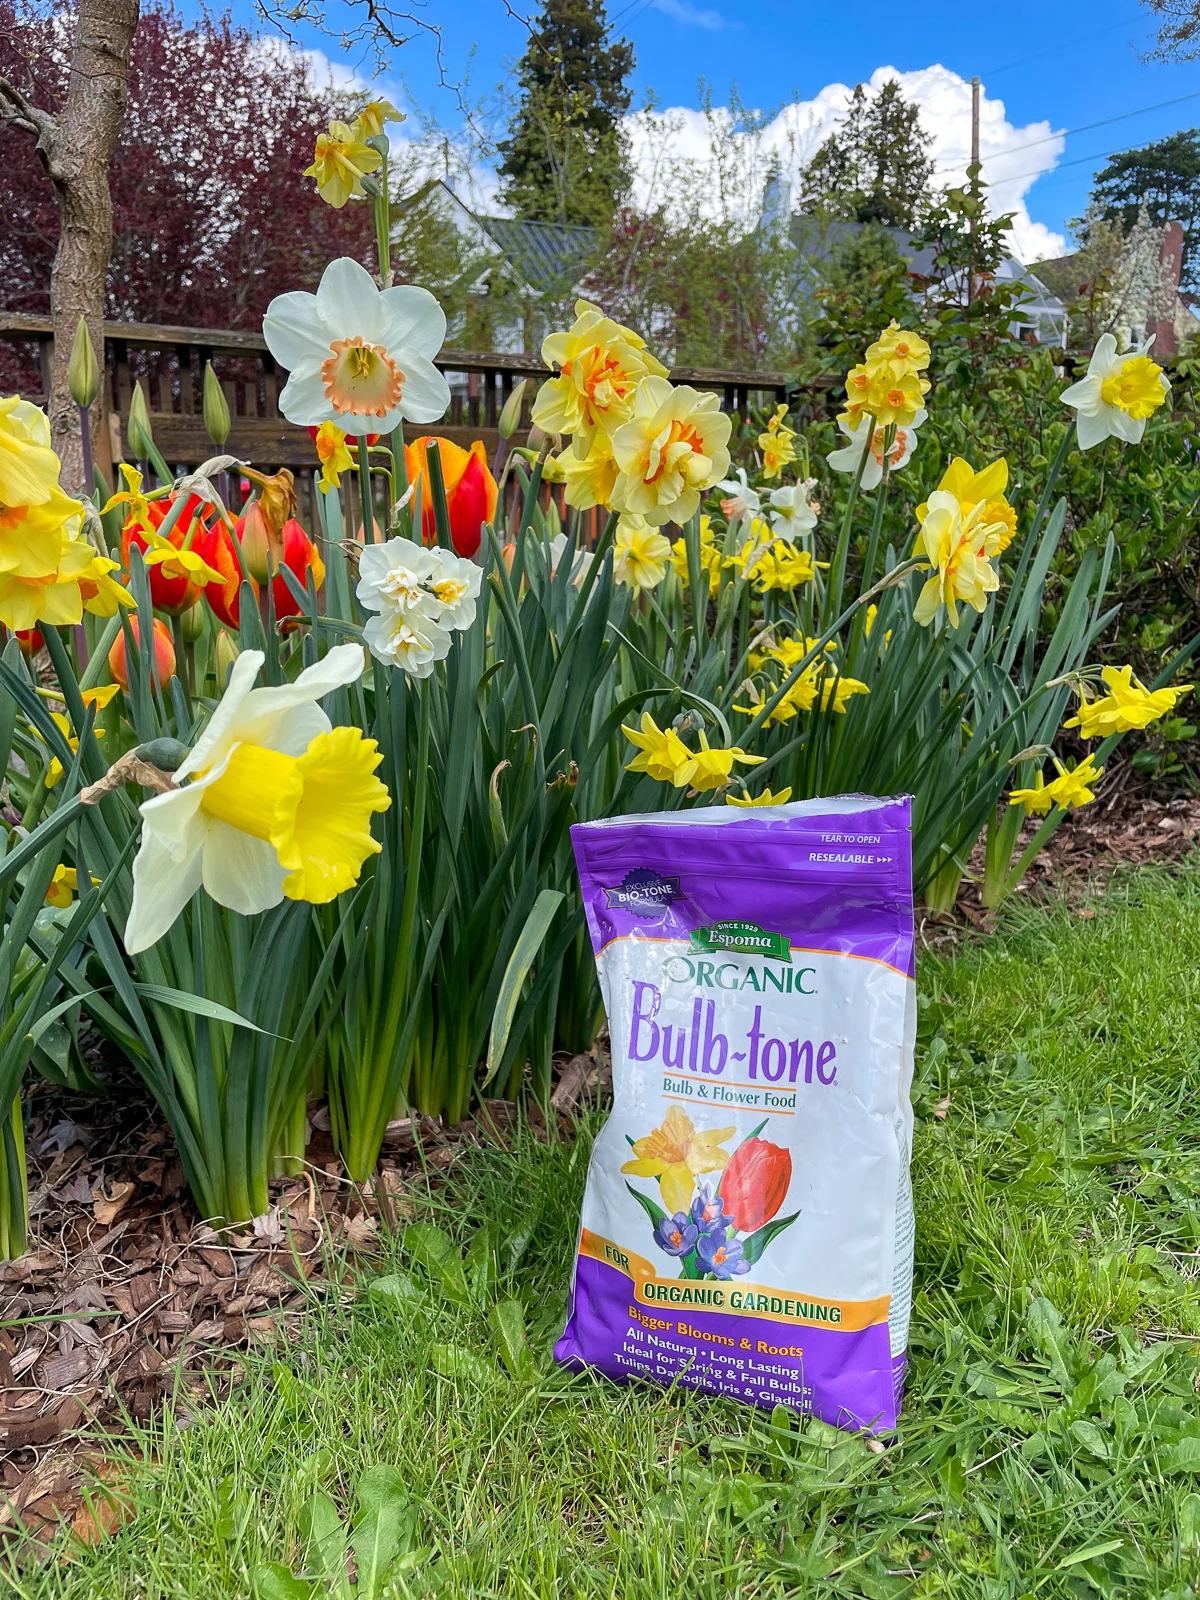 bulb-tone fertilizer bag next to daffodils and tulips